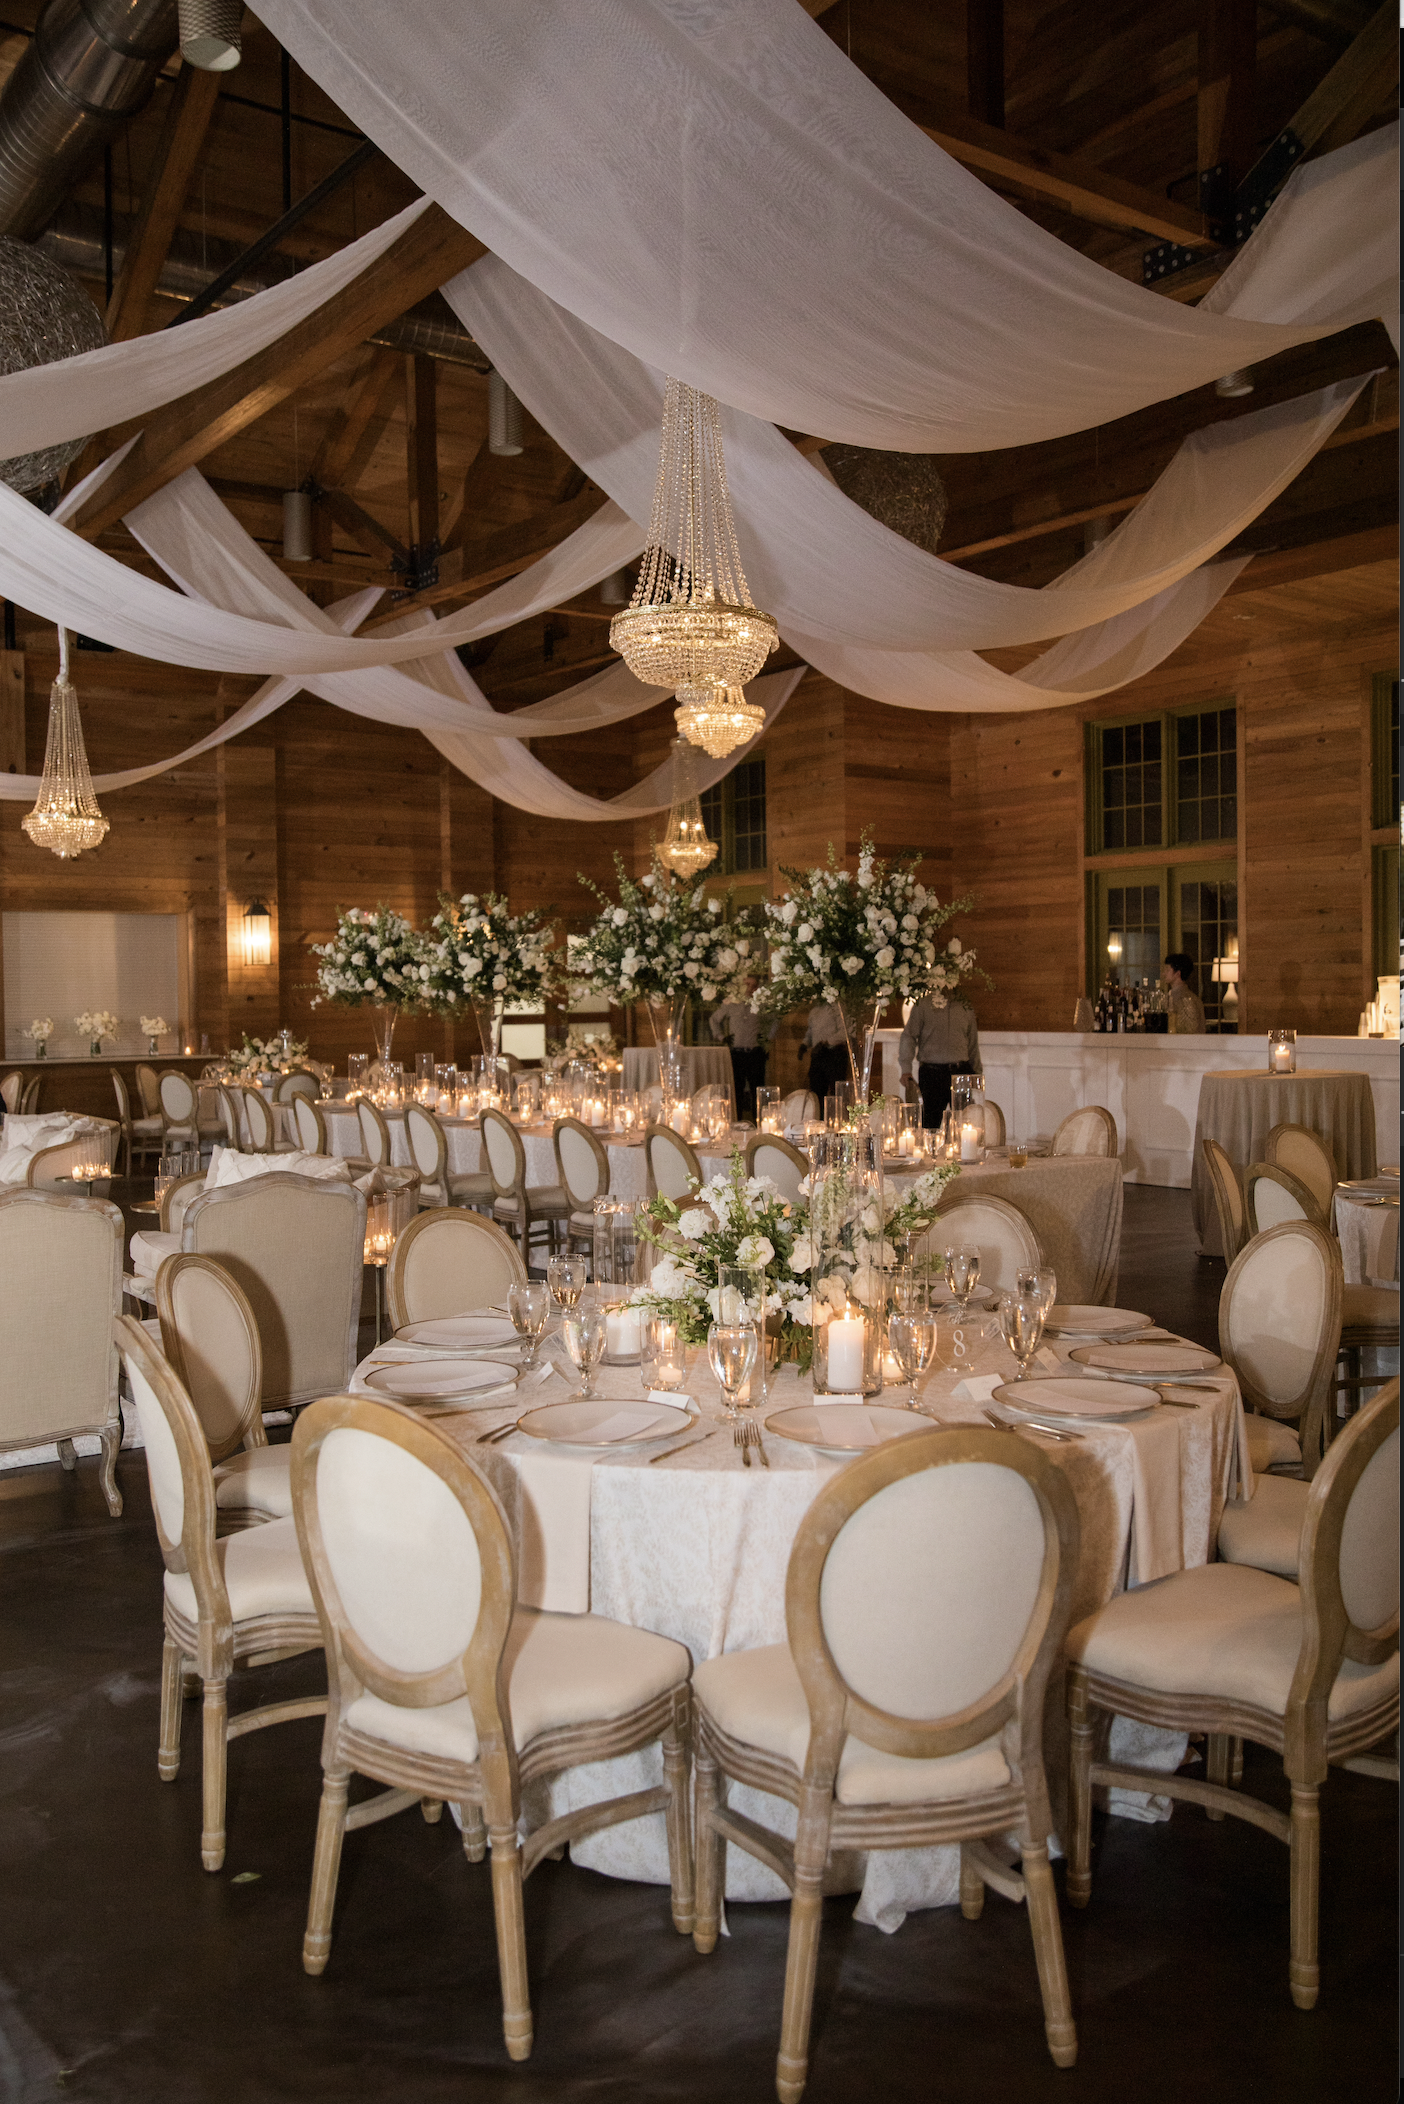 Planning for watercolor lakehouse reception